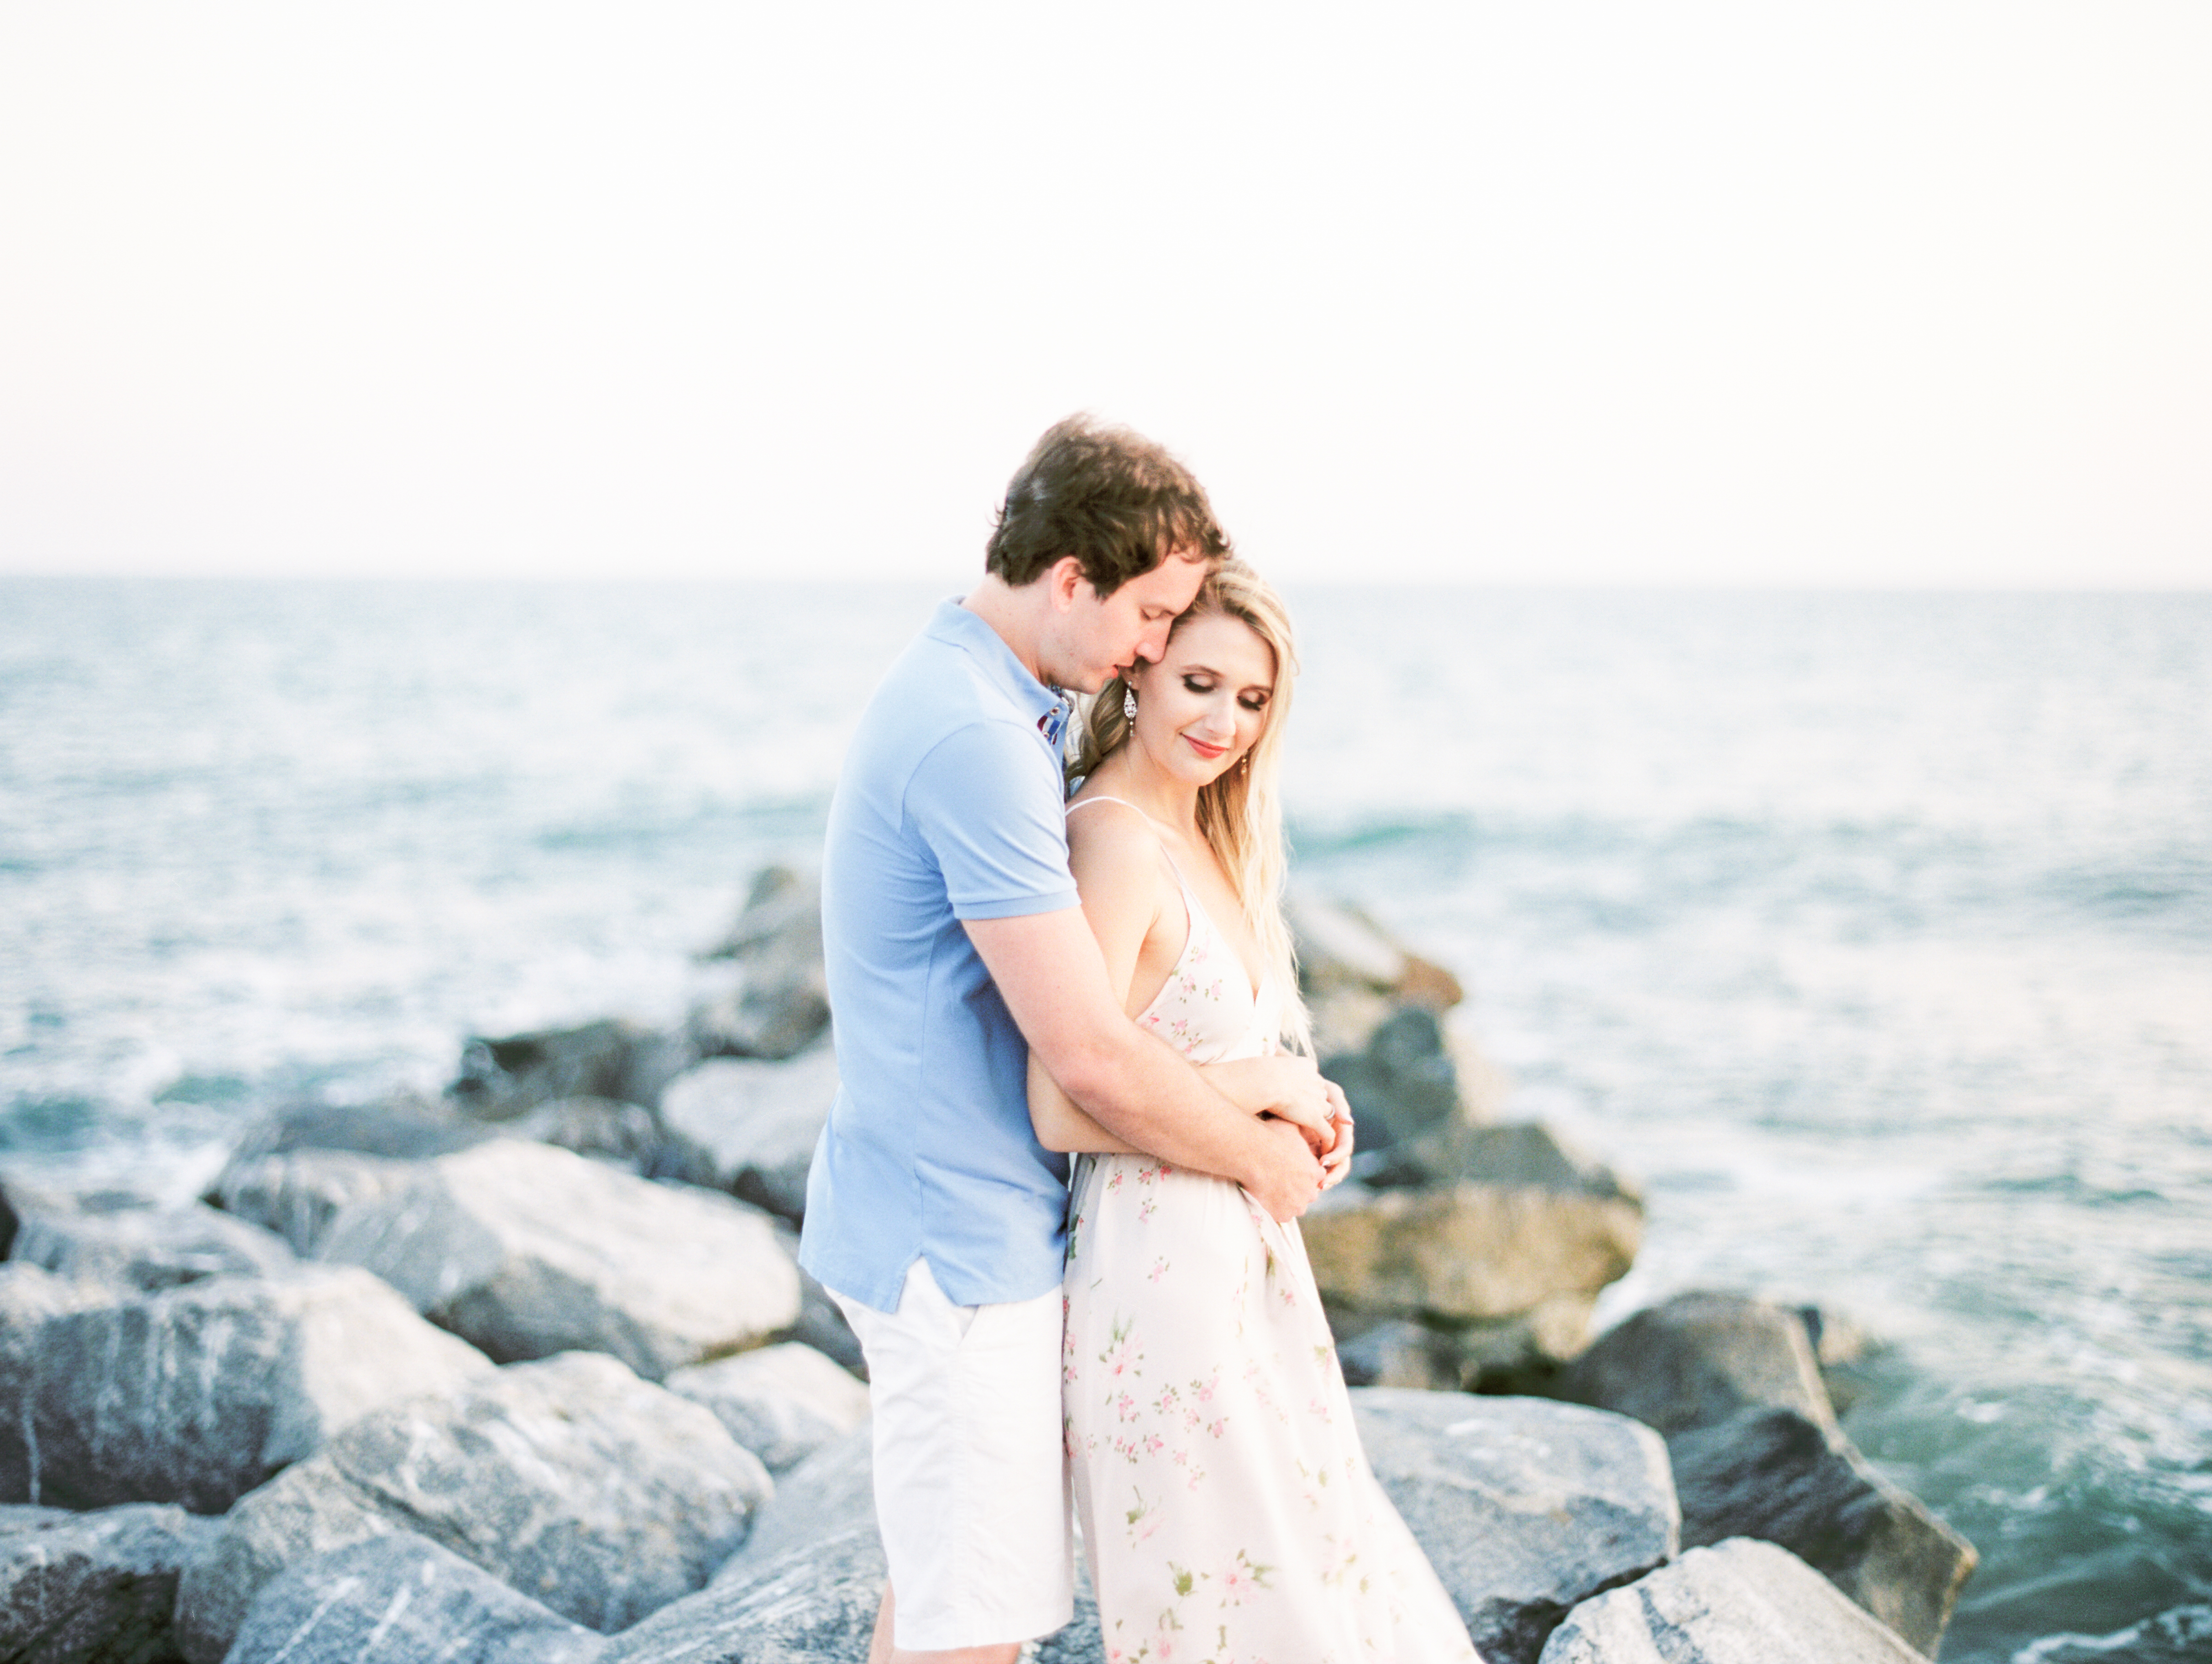 beach engagement session in malibu california - Instagram Husband (From His Perspective) by popular Chicago style blogger and influencer Visions of Vogue